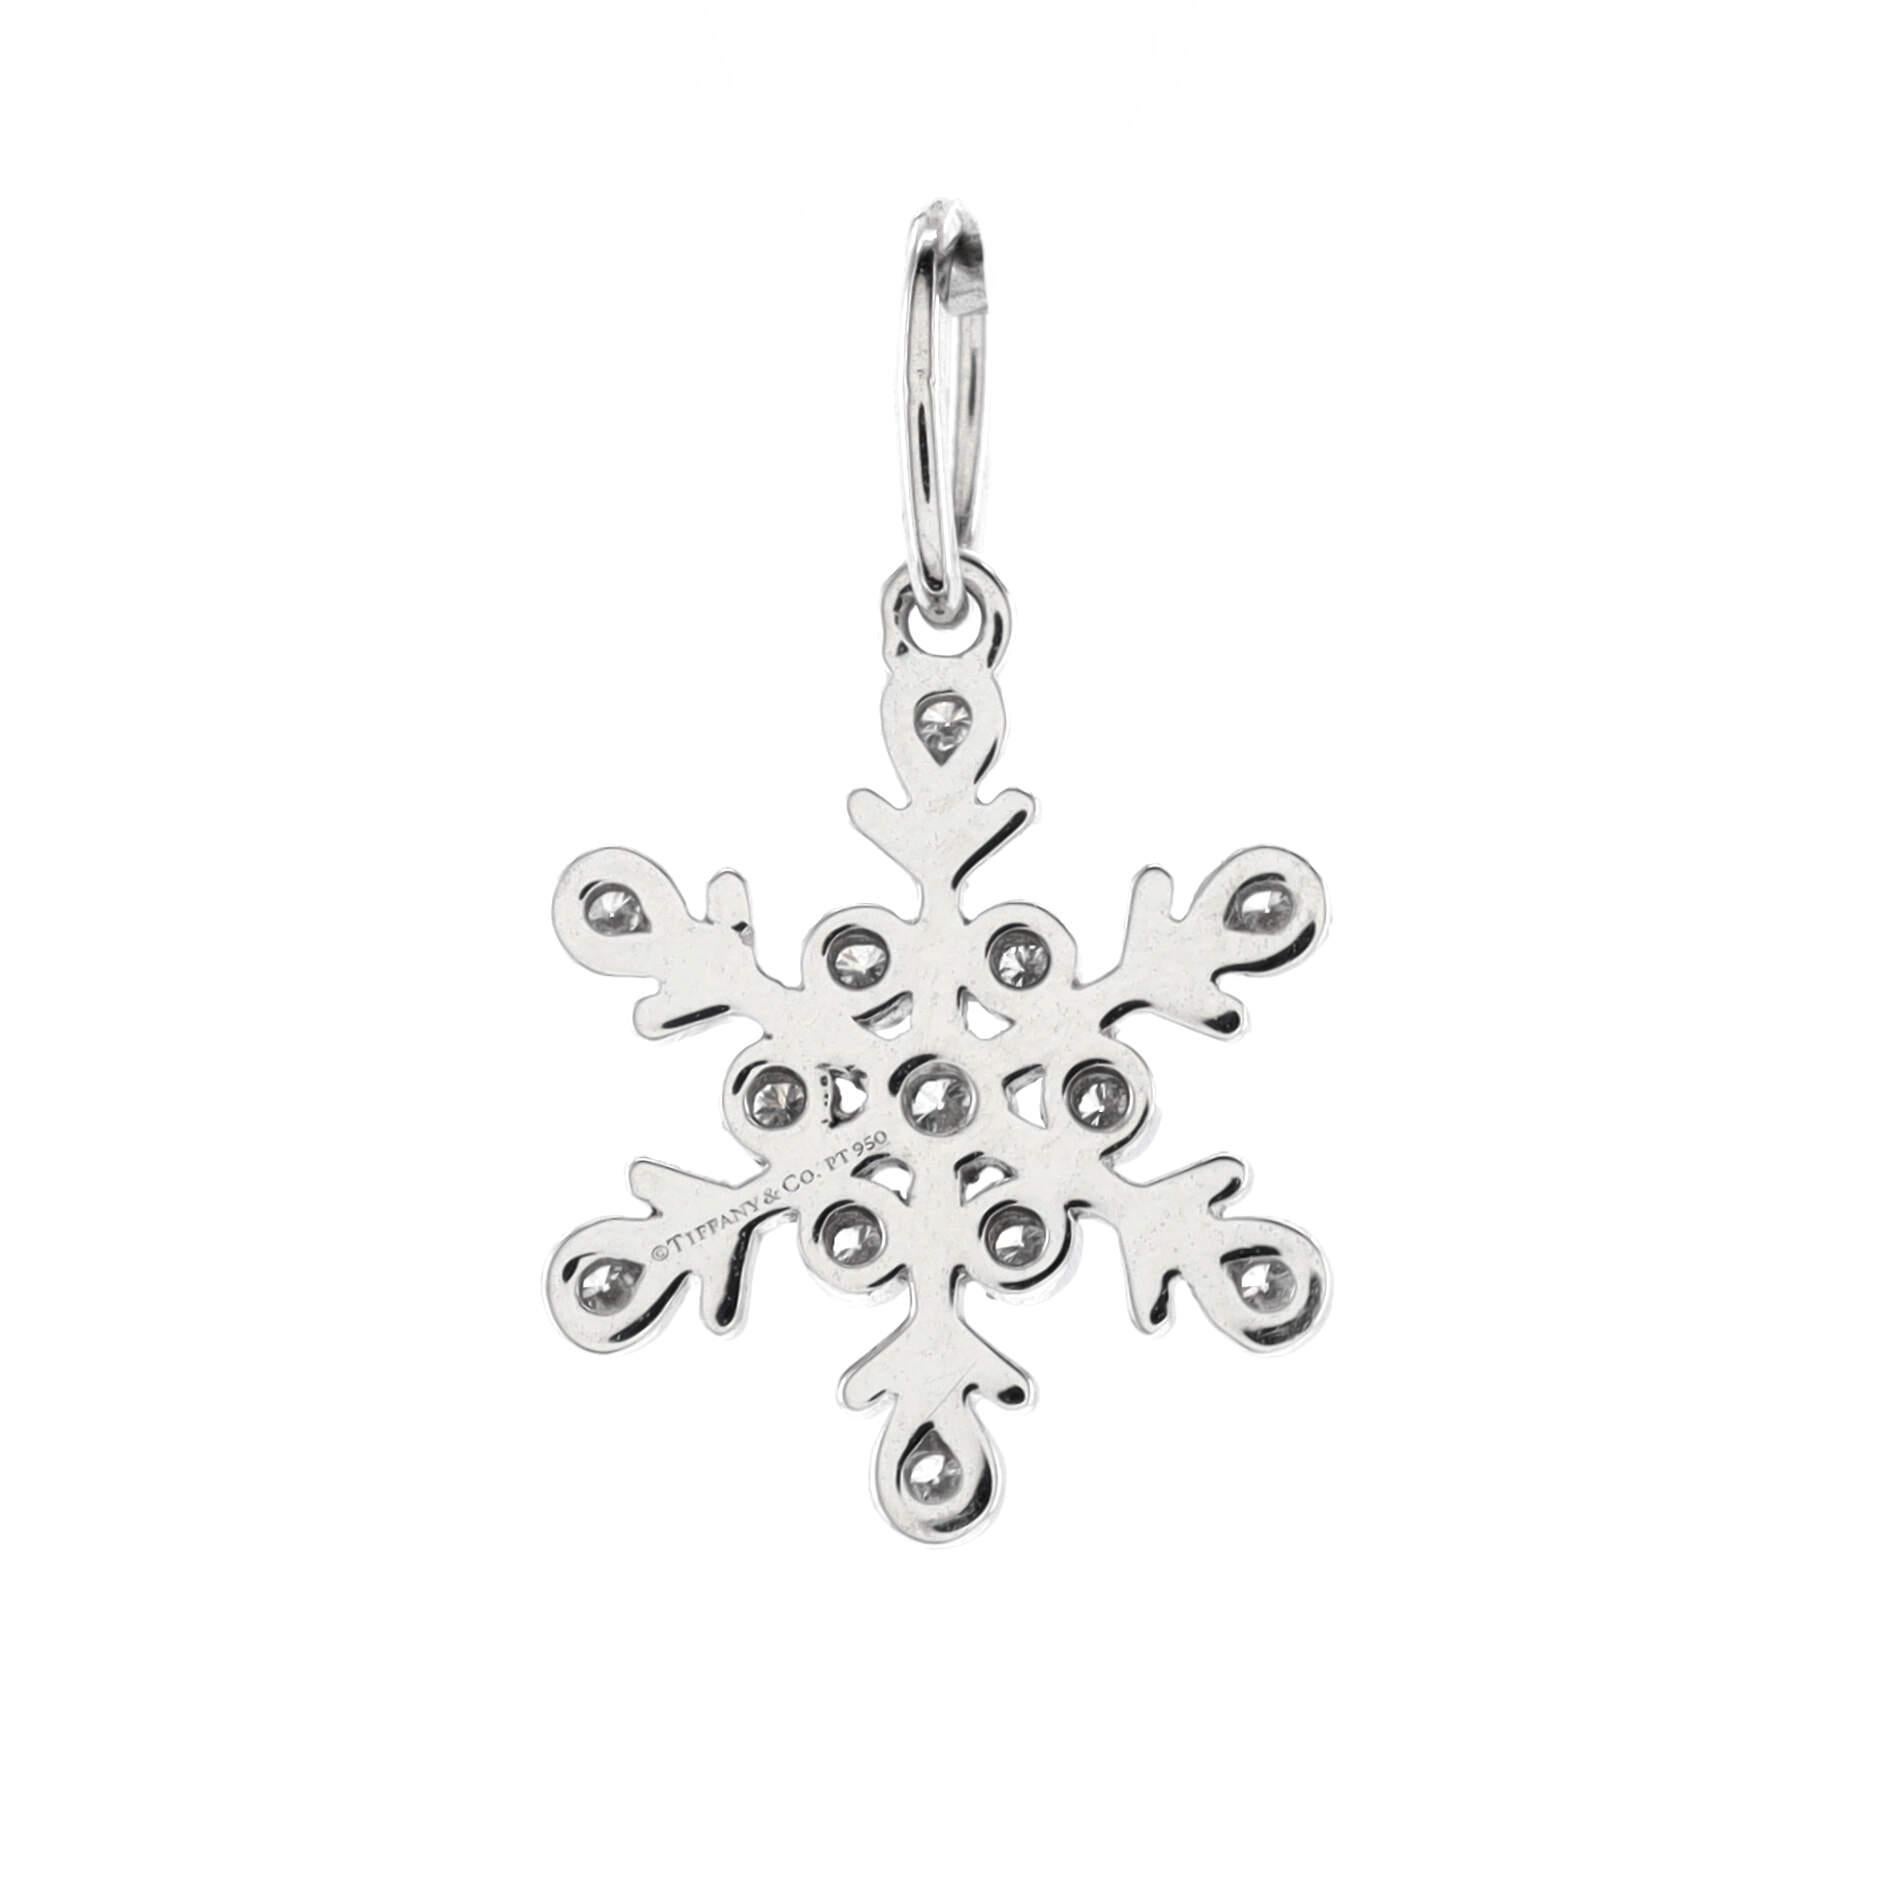 tiffany and co snowflake necklace